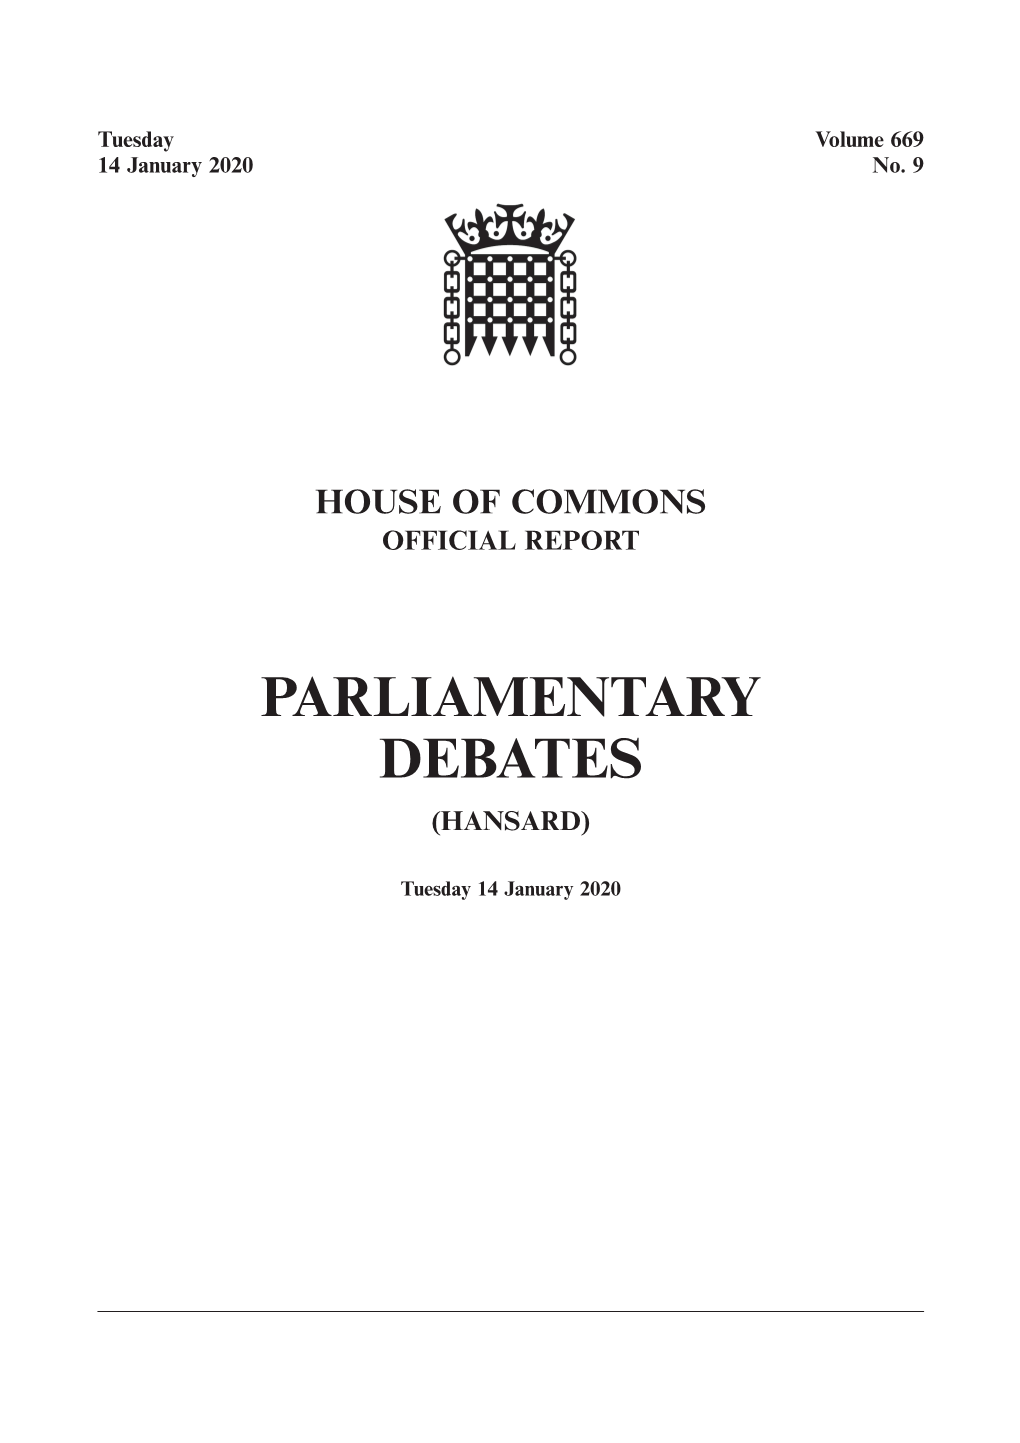 Whole Day Download the Hansard Record of the Entire Day in PDF Format. PDF File, 0.81